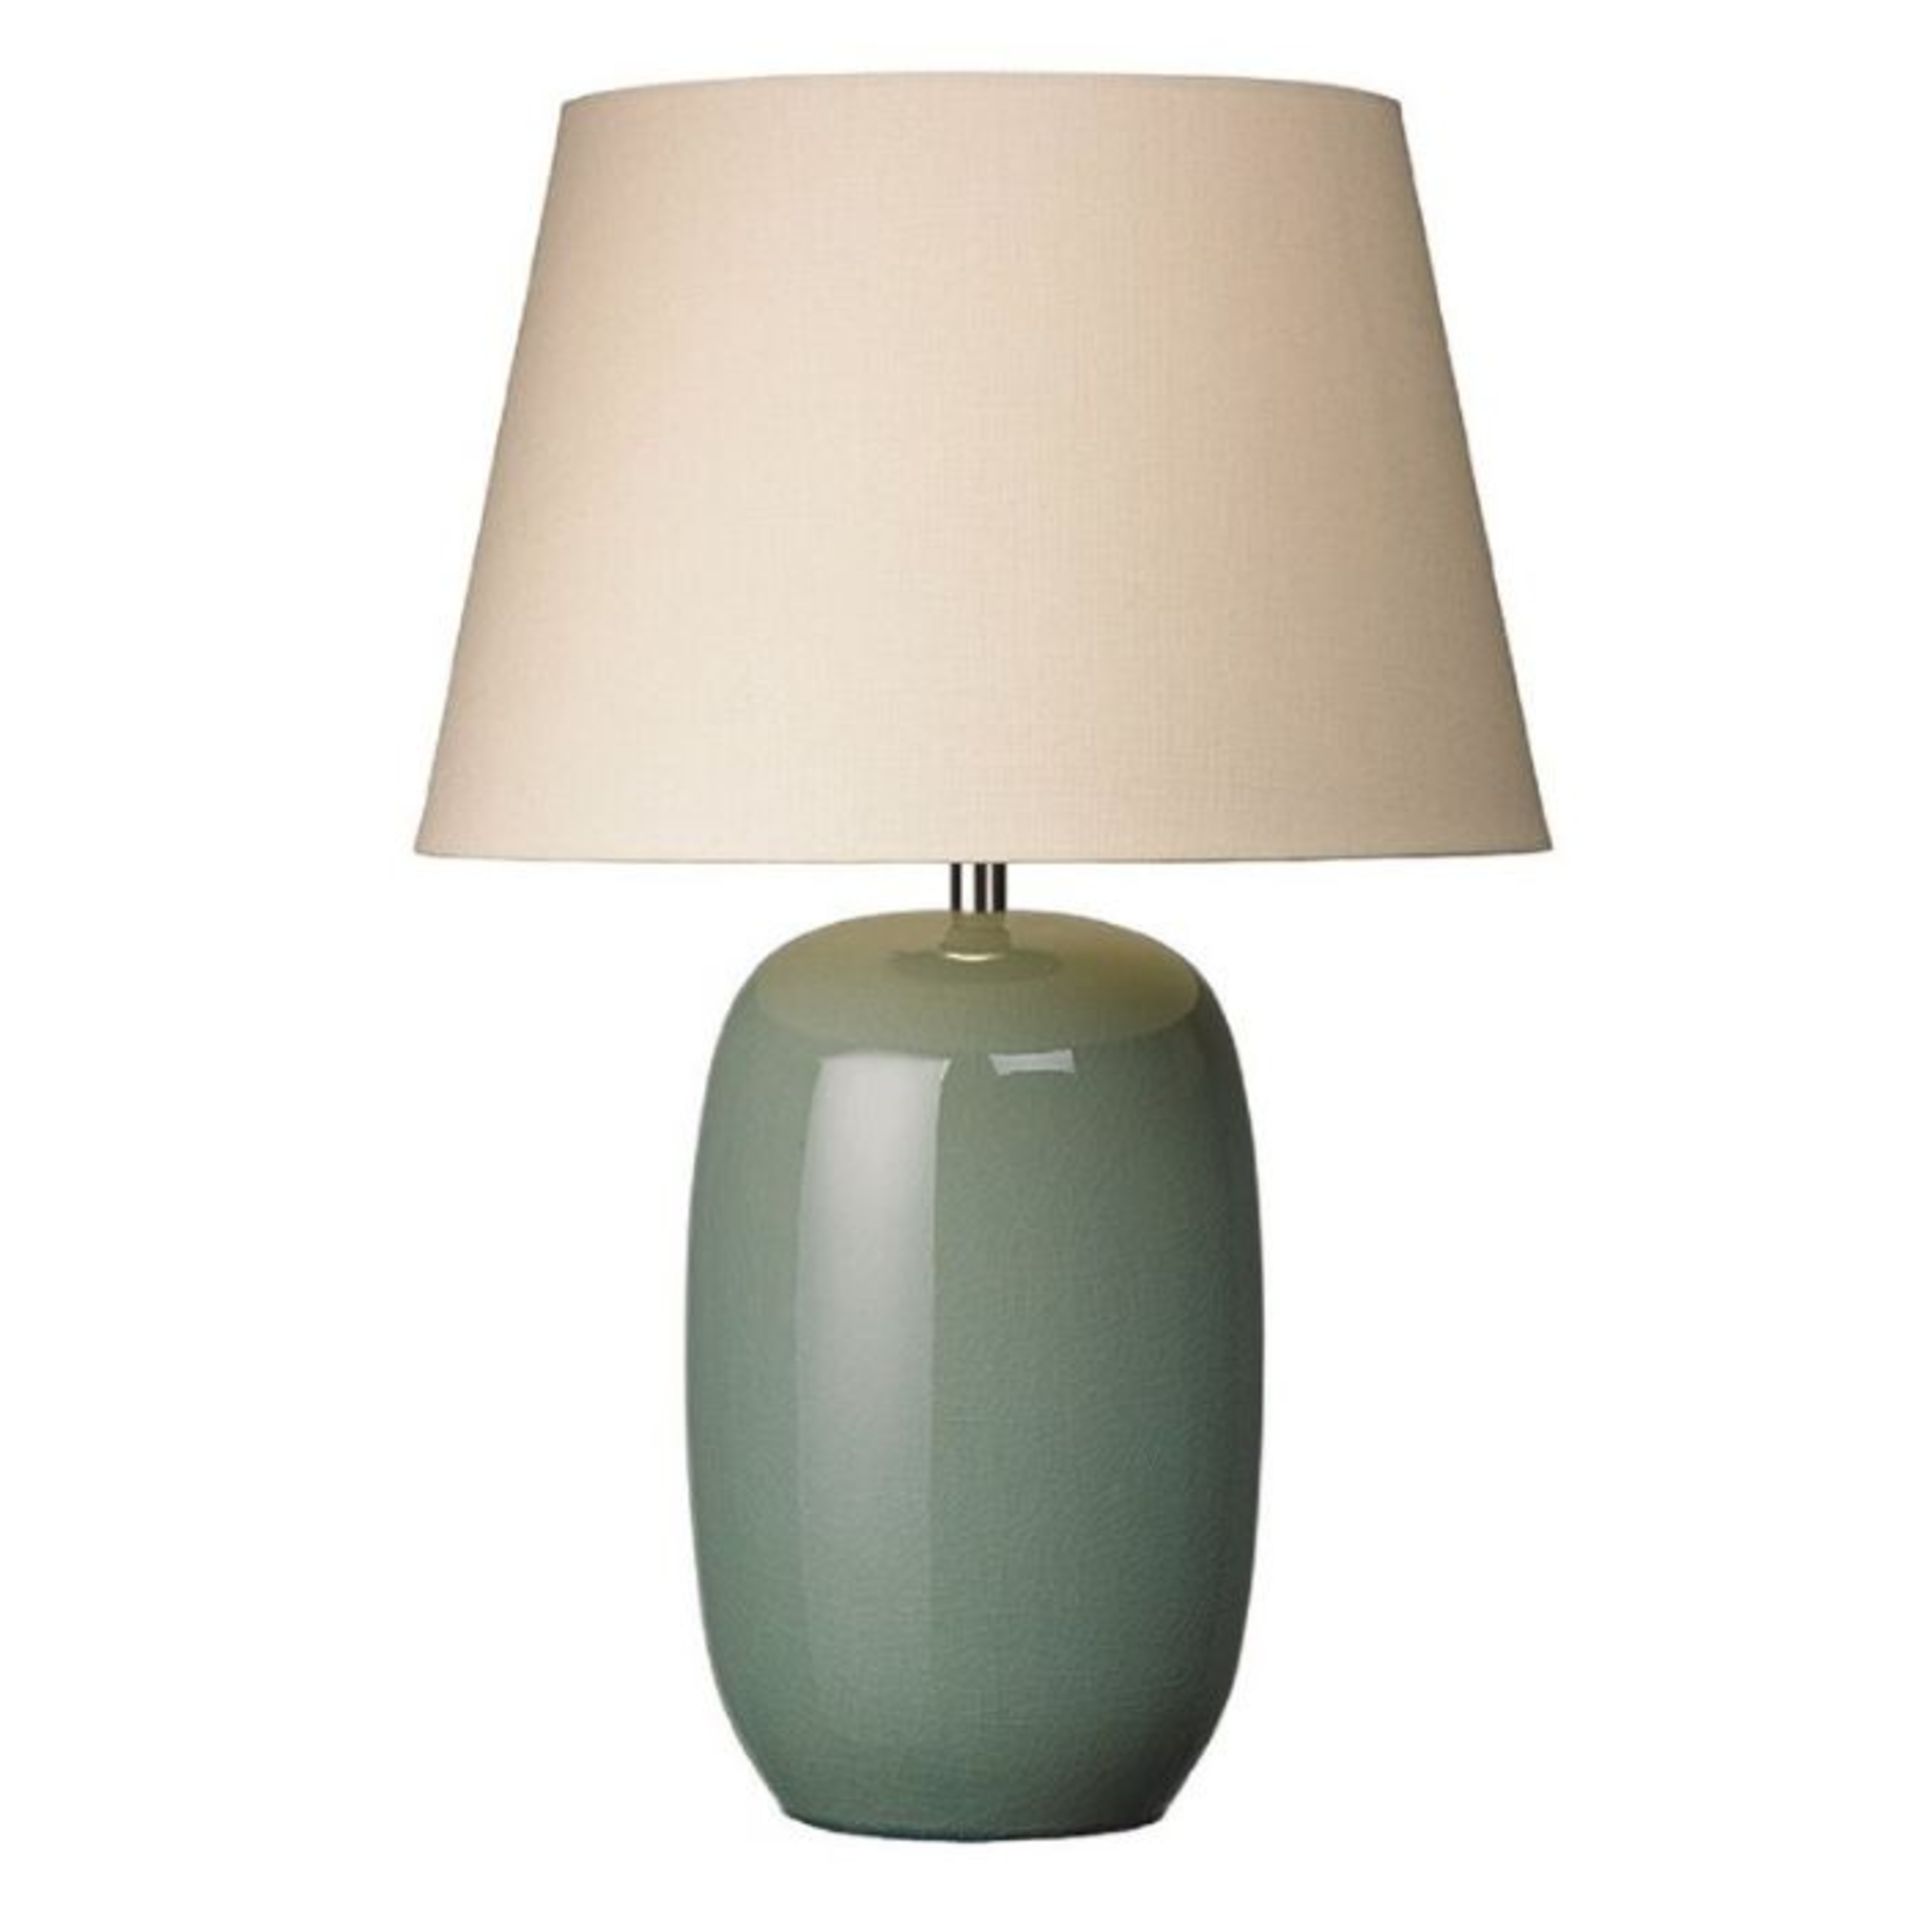 JAYSON 57.5CM TABLE LAMP BY BRAMBLY COTTAGE